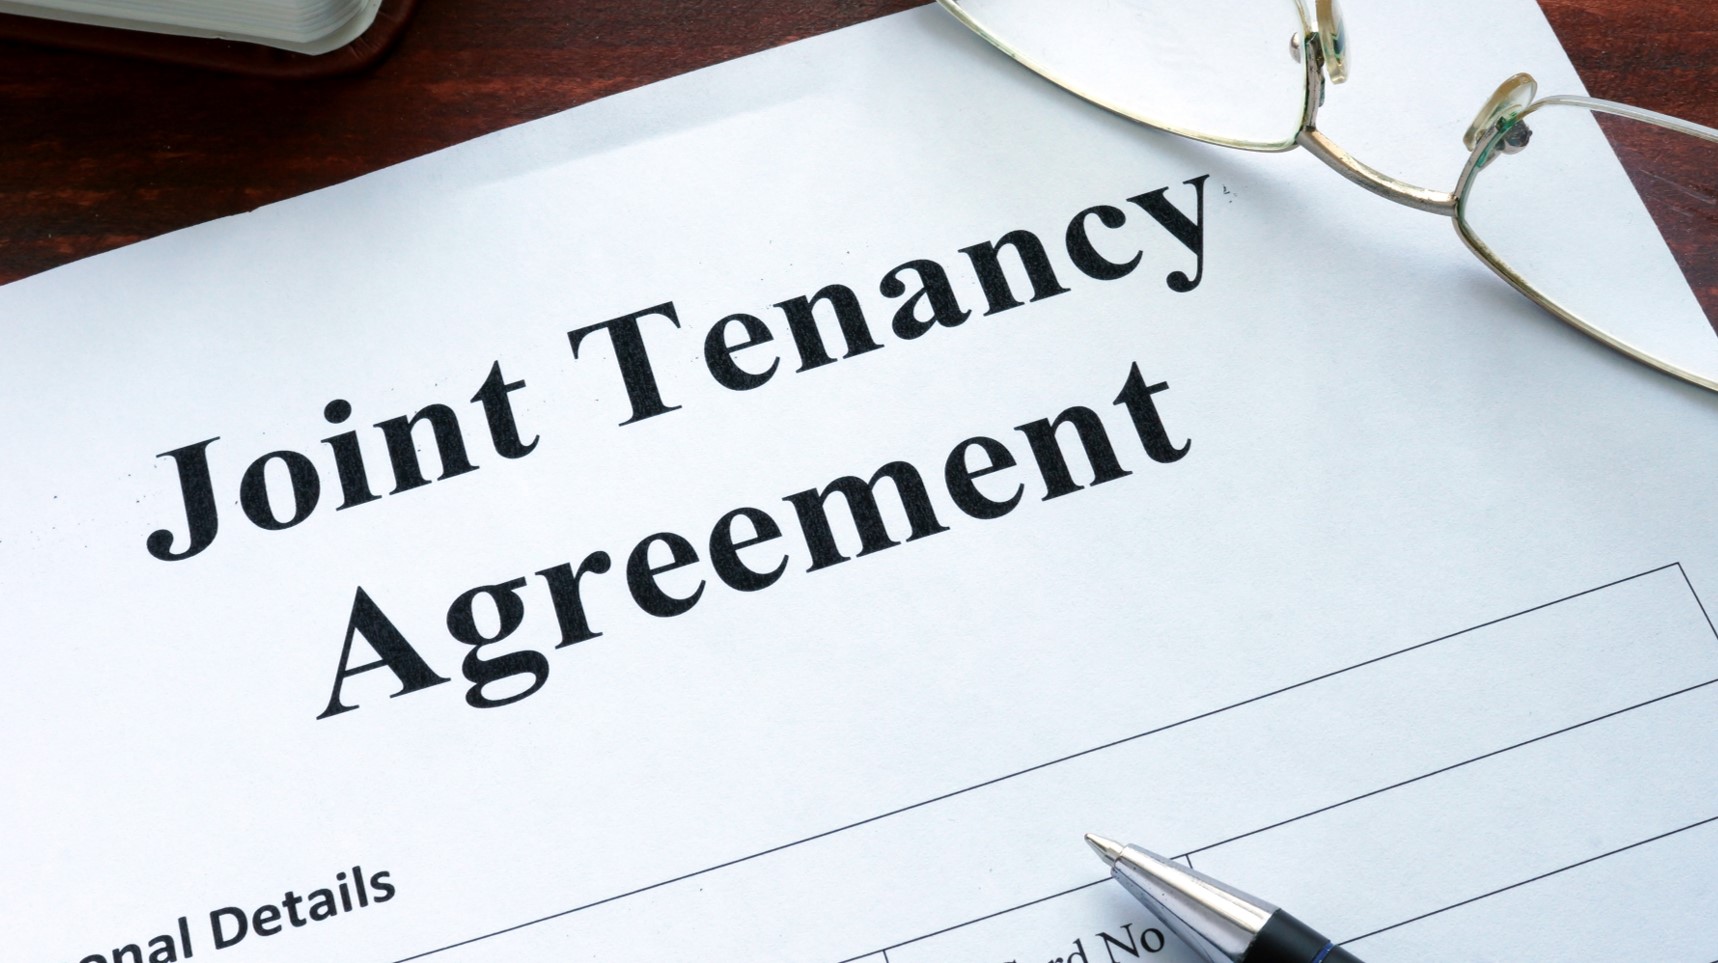 Paperwork with joint tenancy